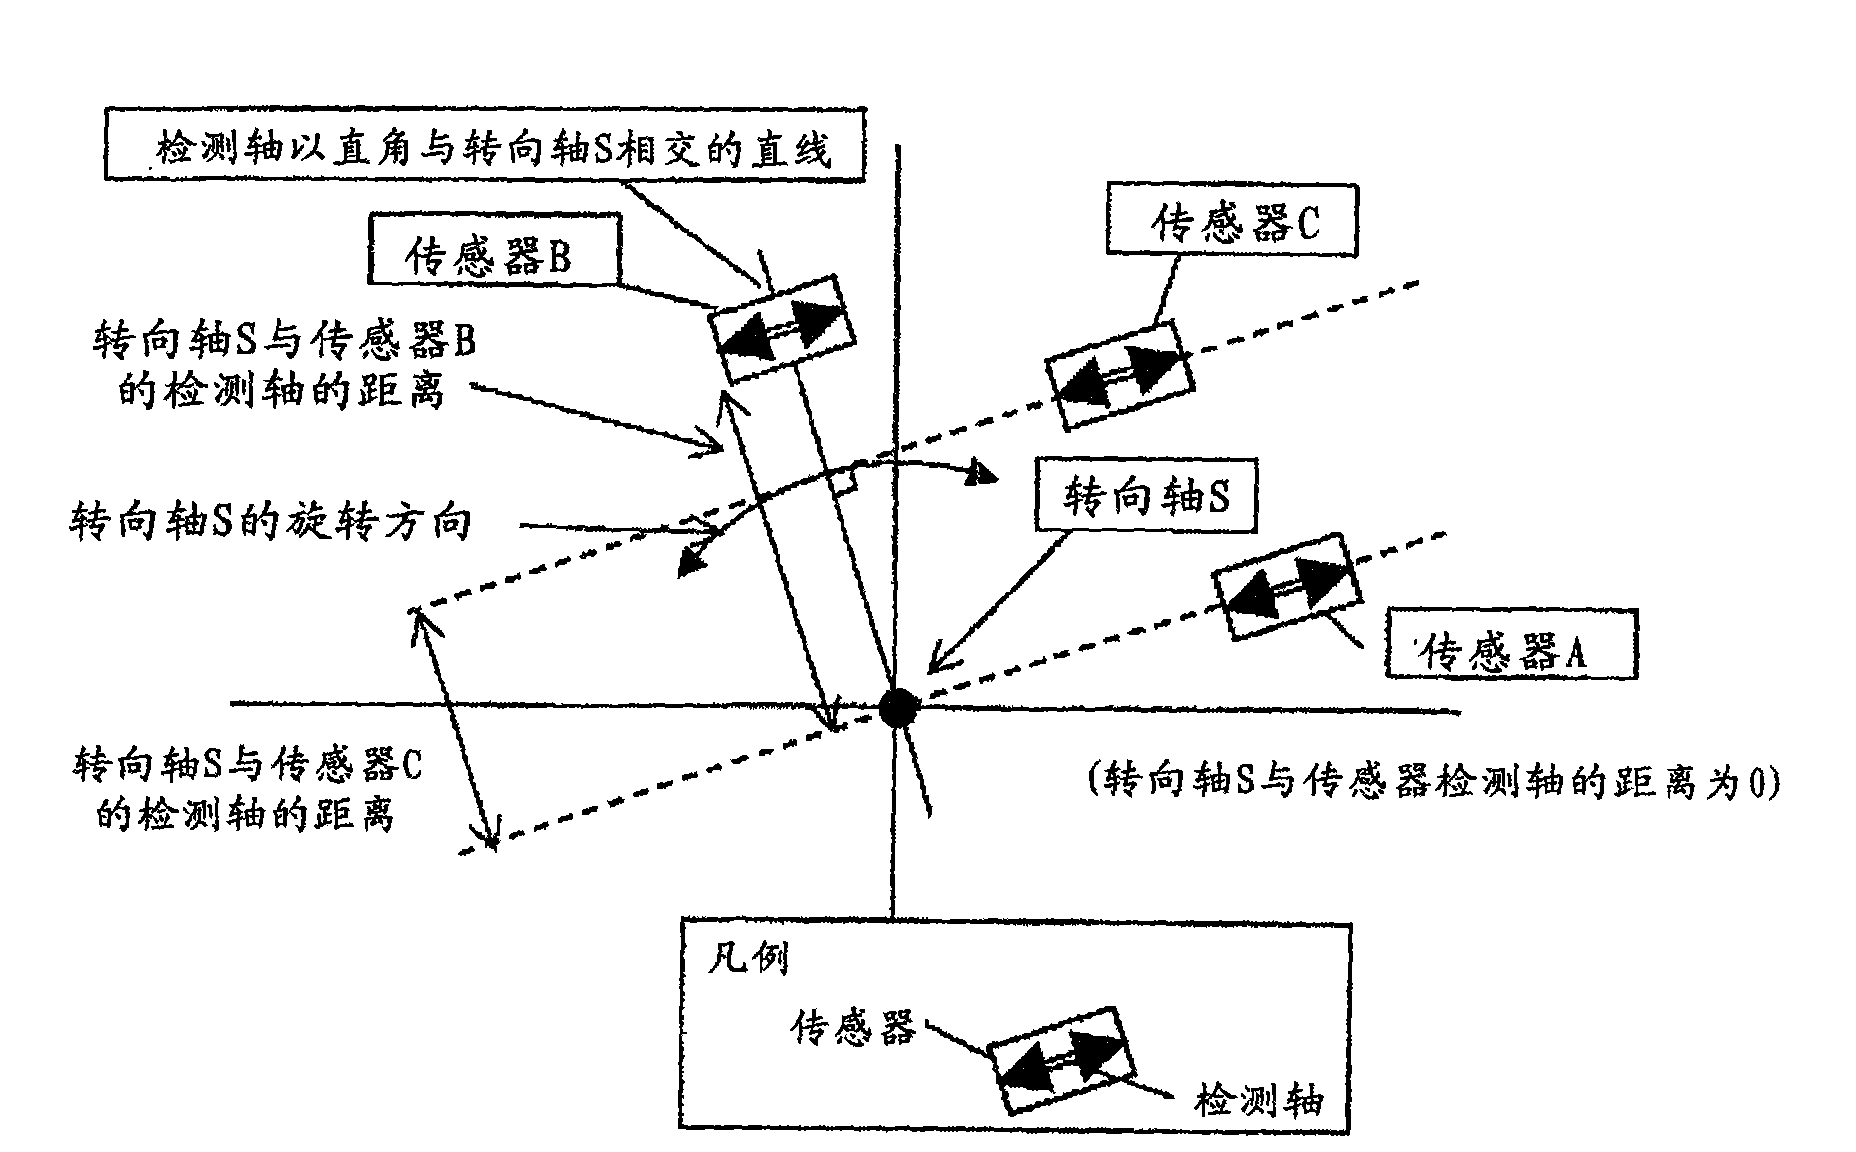 Motion control sensor system for a moving unit and motion control system